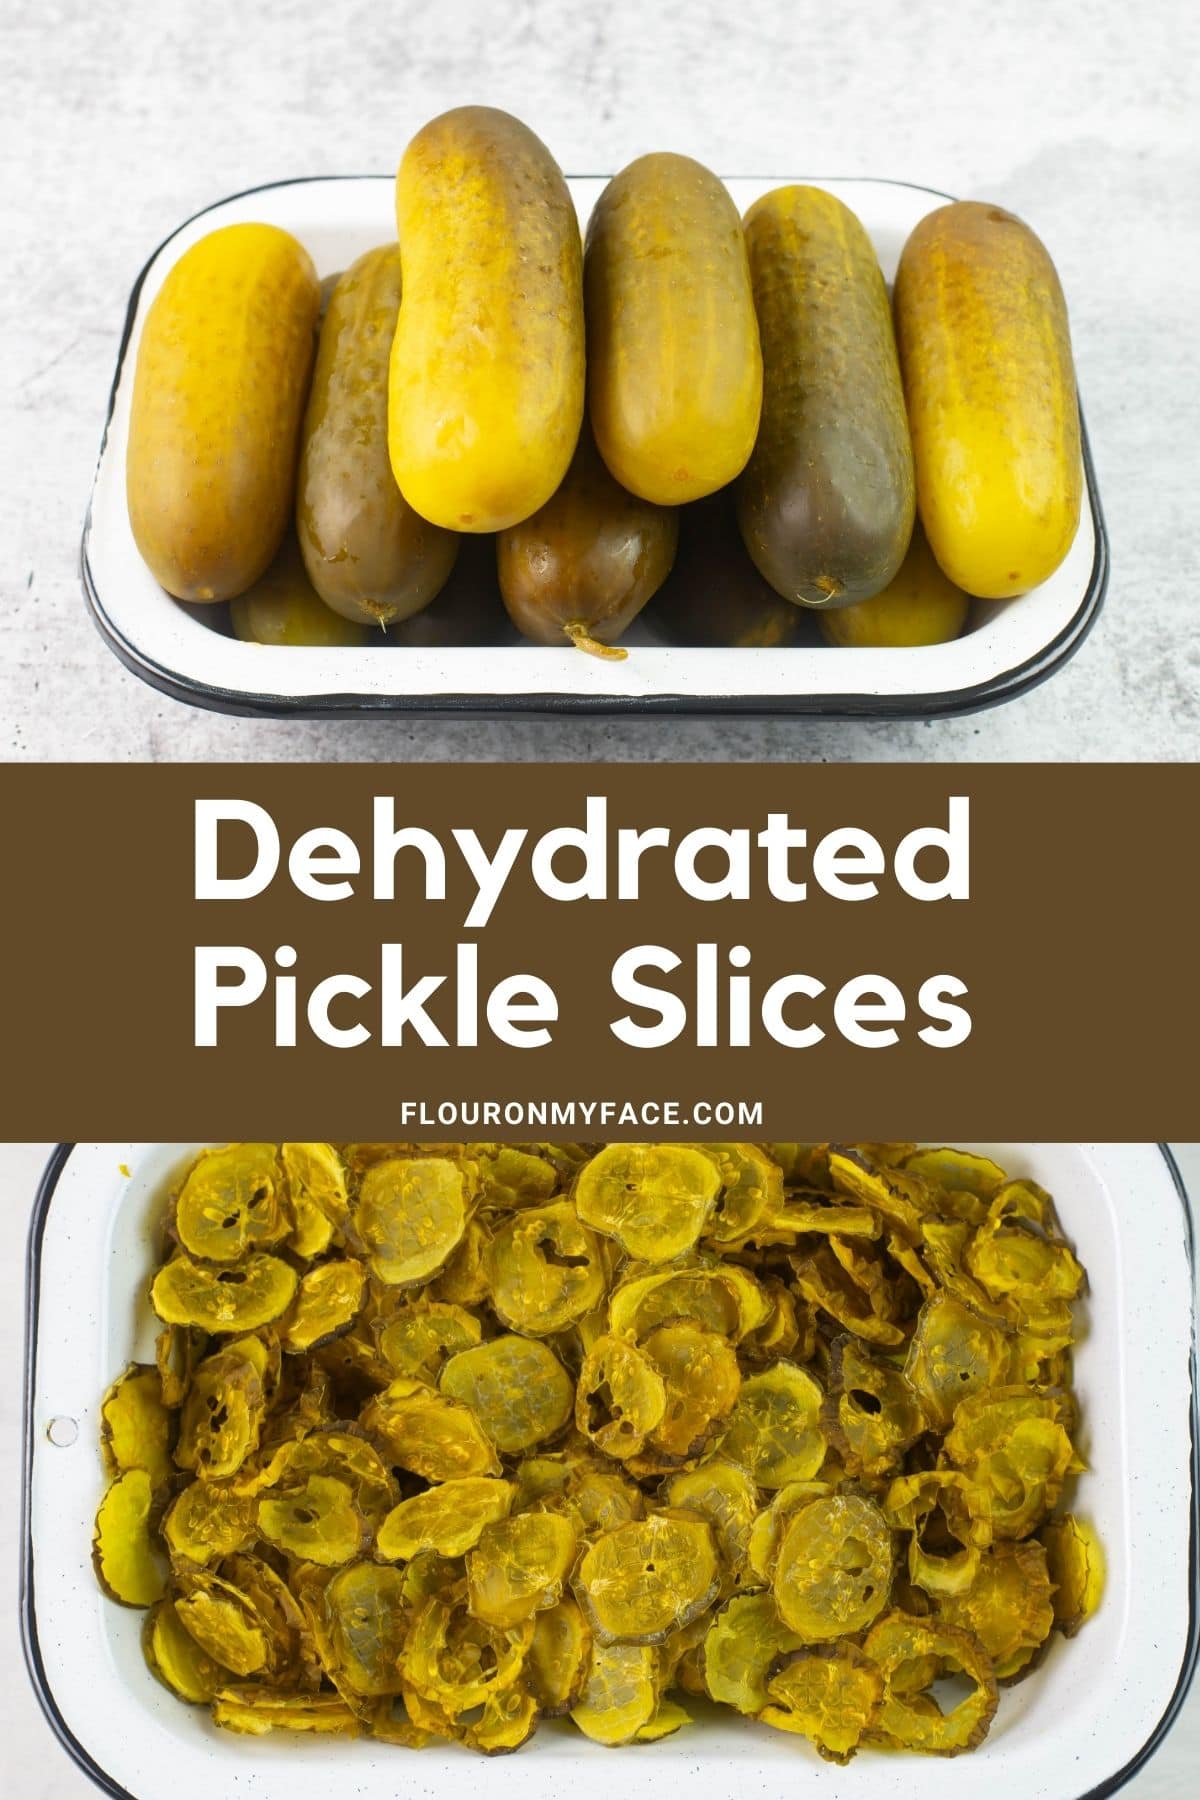 Long verticle image of whole pickles and dehydrated sliced pickles.